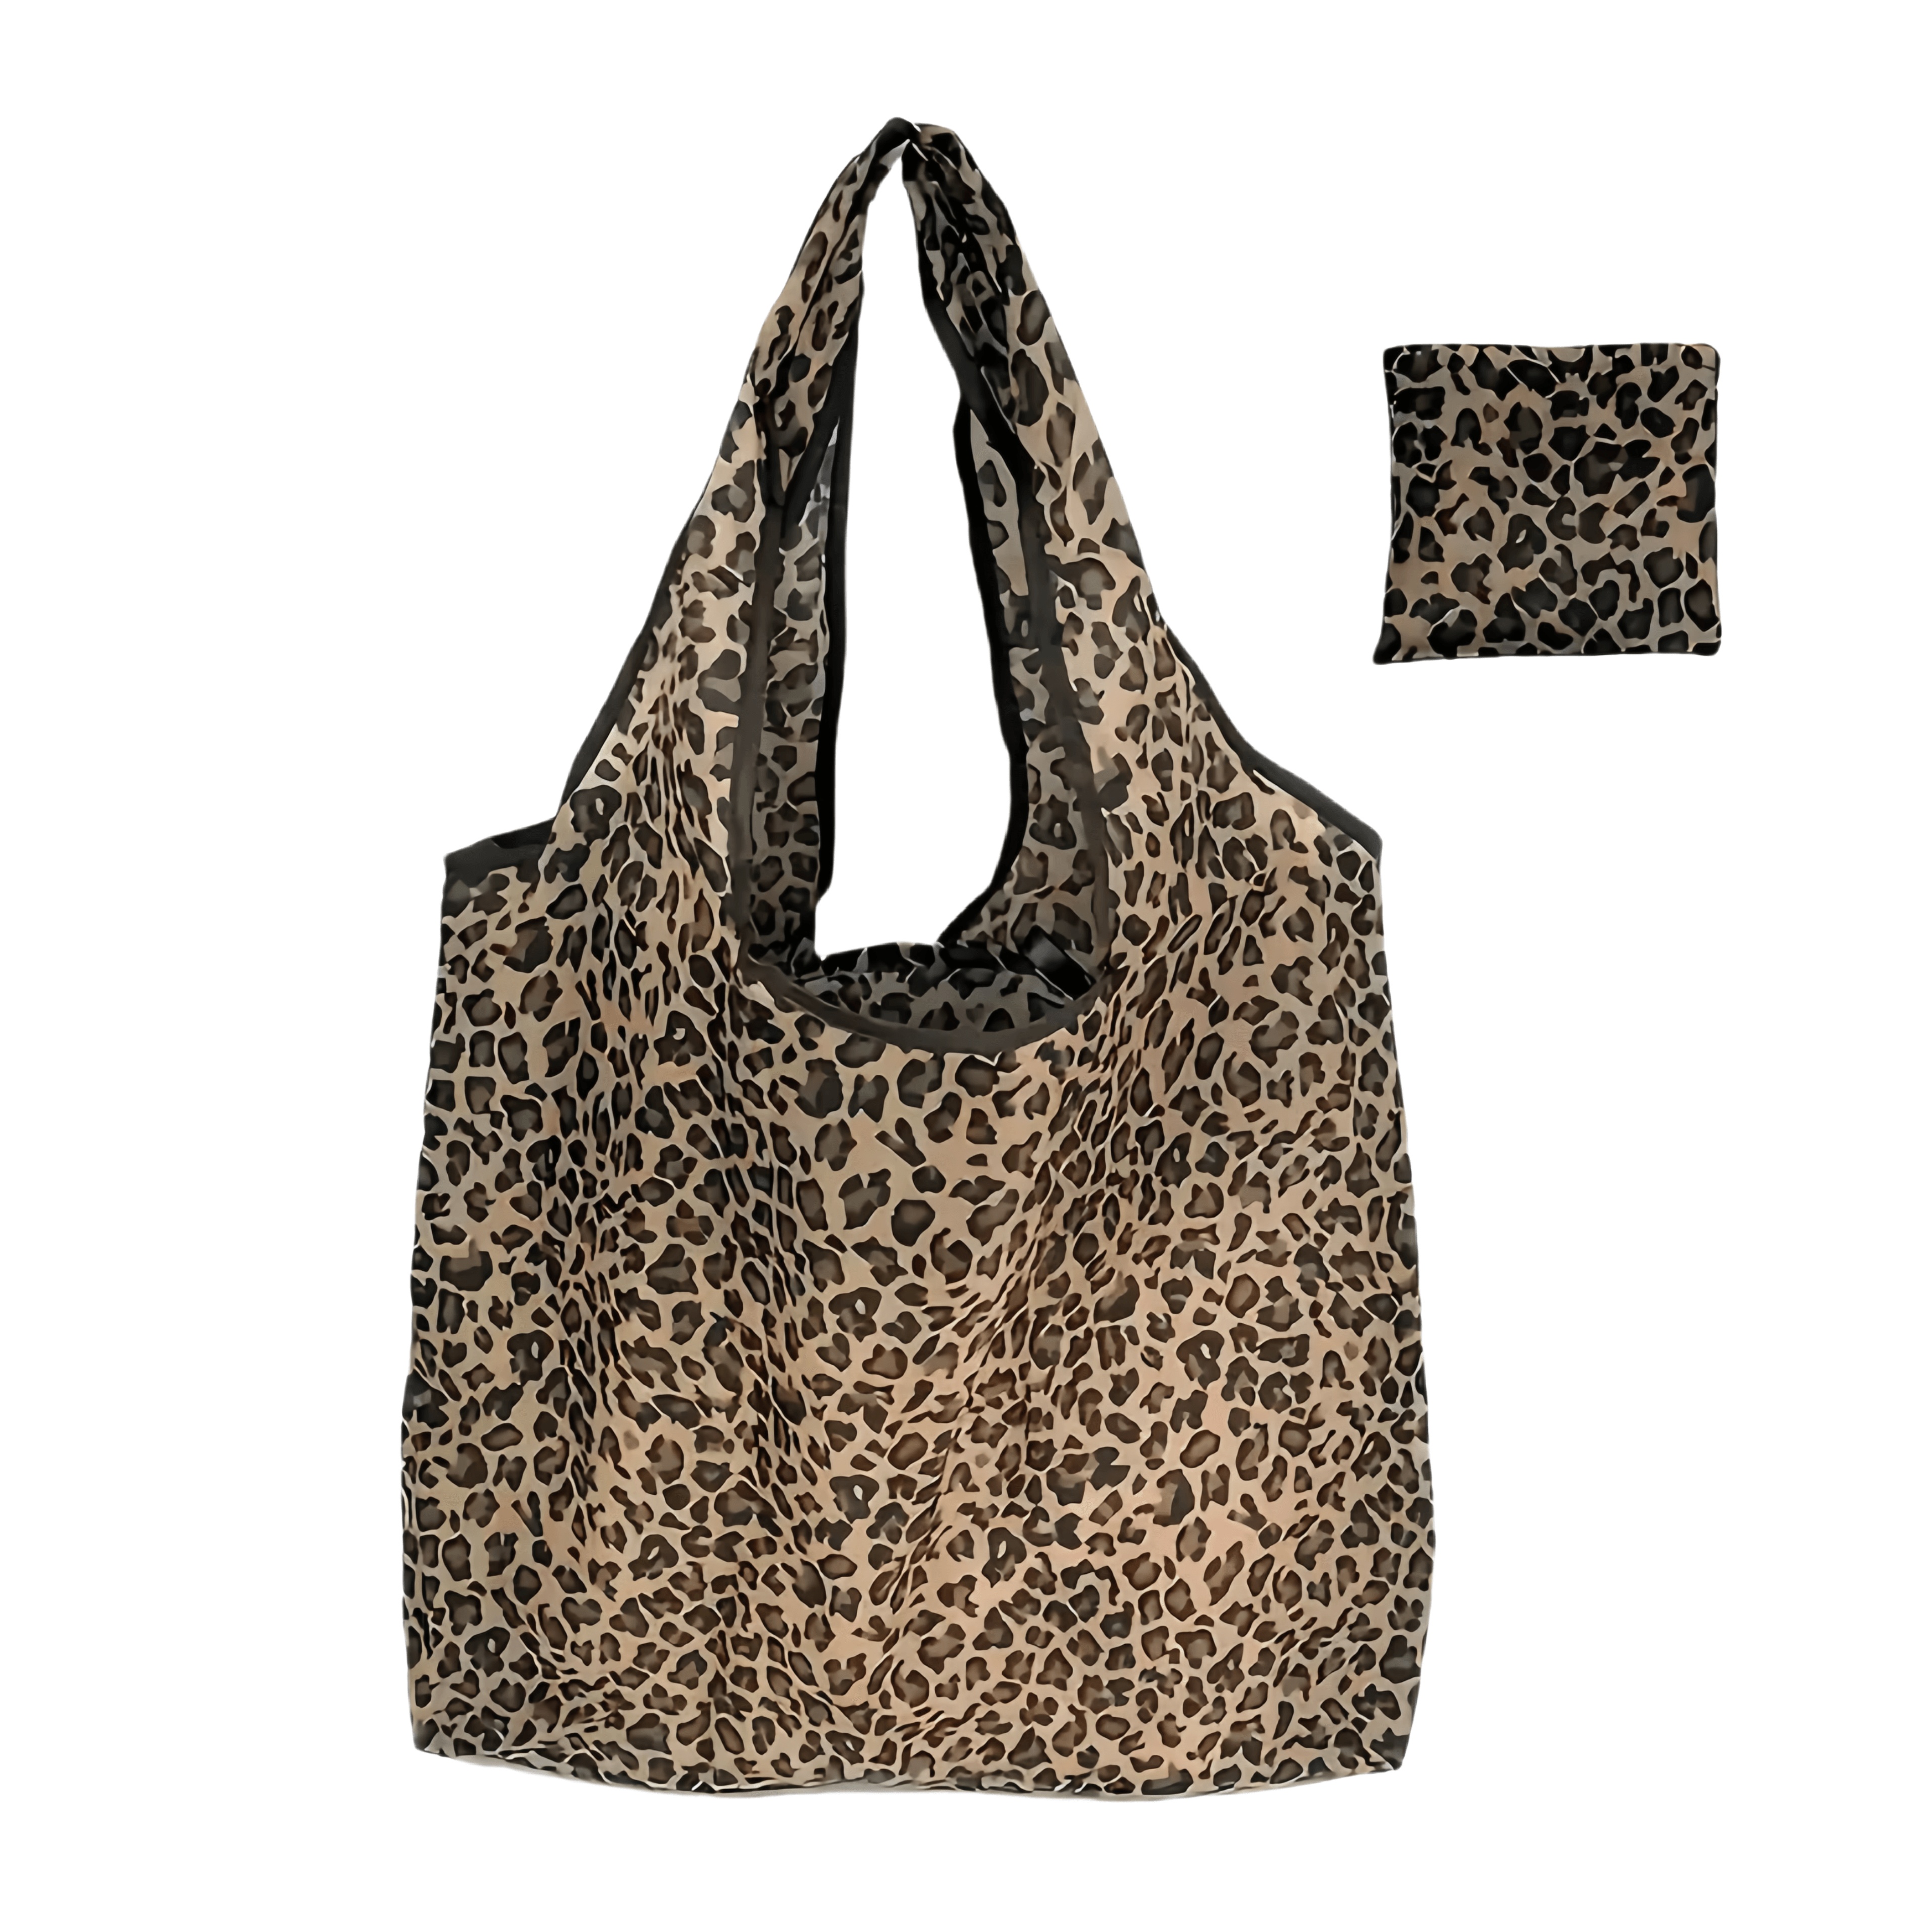 

1pc, Leopard Print Reusable Shopping Tote Bag, Collapsible Polyester Lightweight Grocery Bag, Picnic Carry Bag With Compact Pouch, 18.1x13.8 Inches